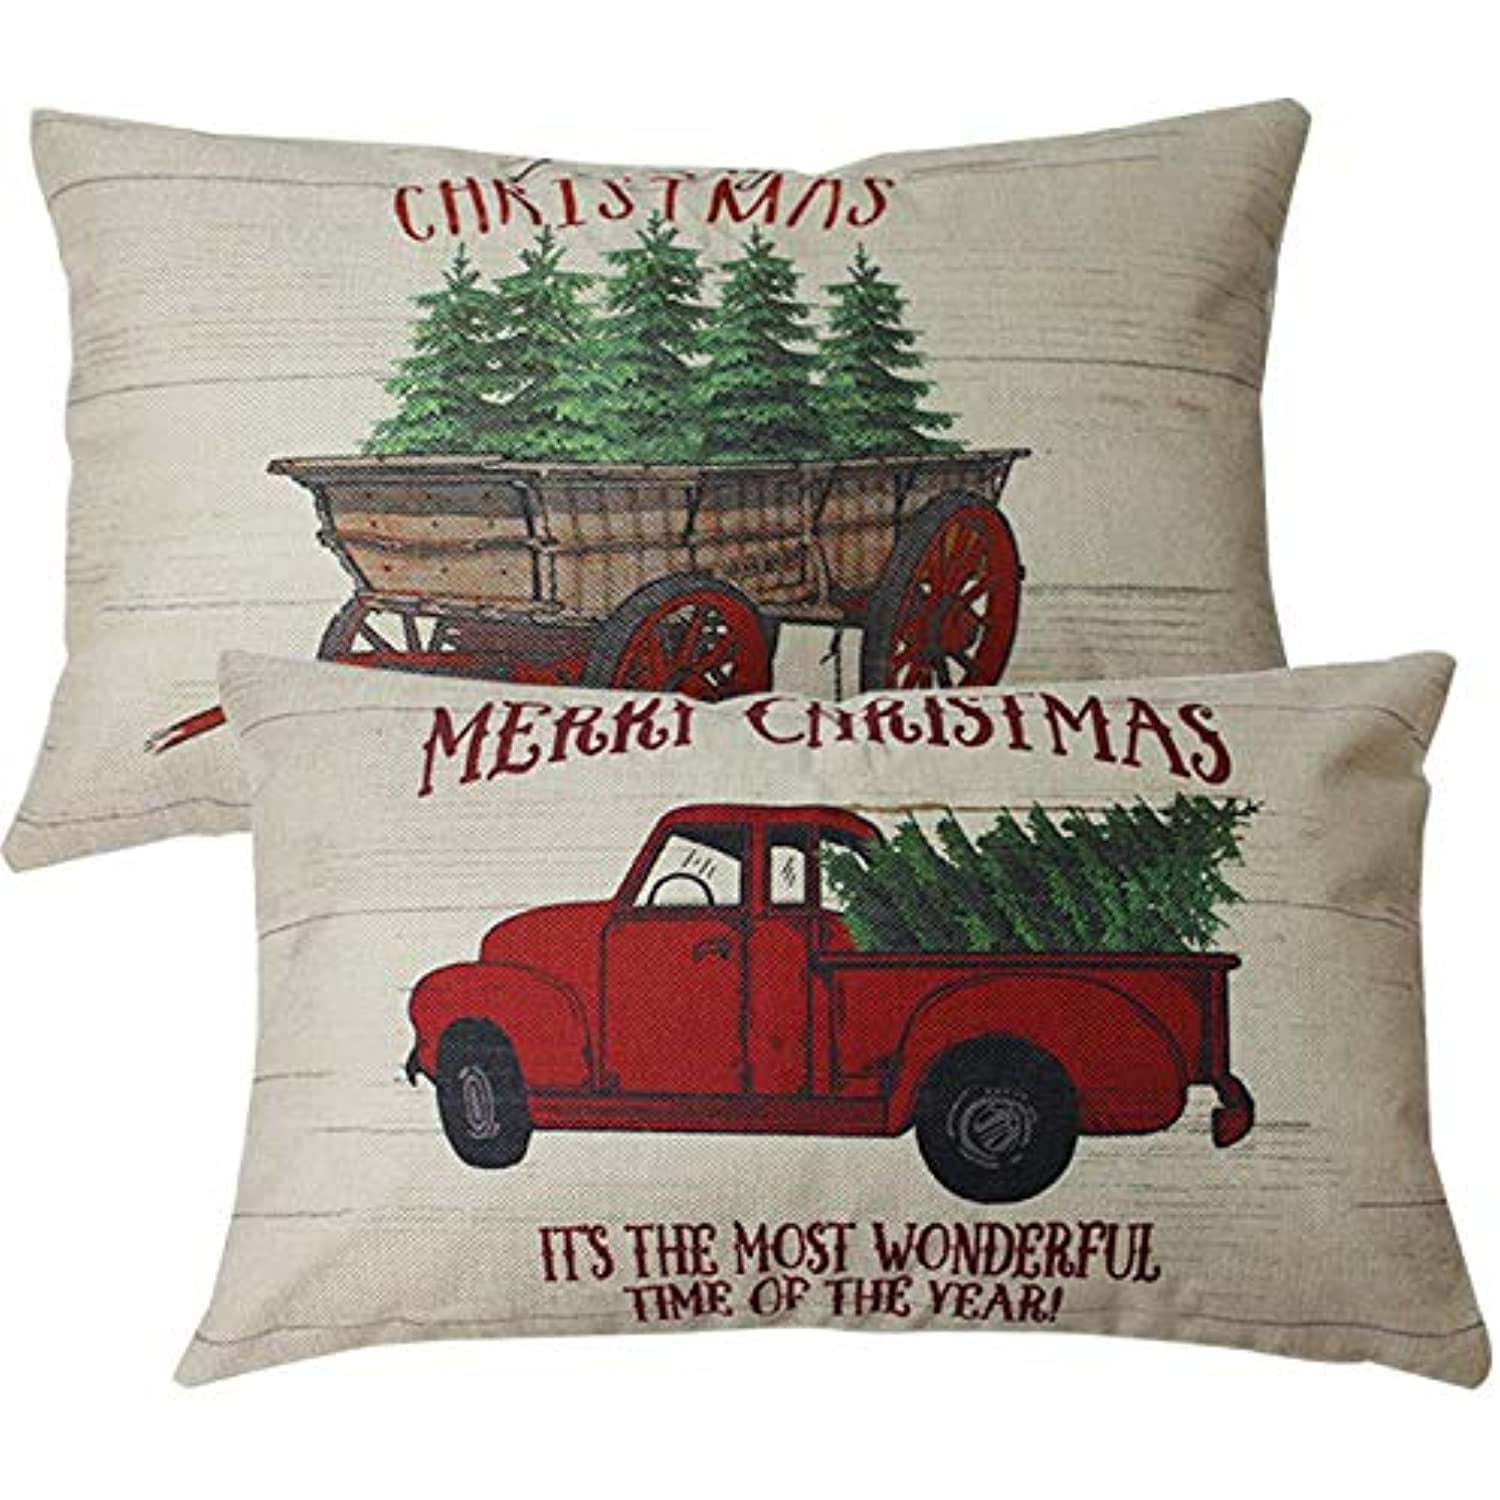 ULOVE LOVE YOURSELF 2Pack Merry Christmas Pillow Cover with Christmas Tree and Vintage Red Truck Pattern Cotton Linen Home Decorative Throw Cushion Case 20 x 20 inches